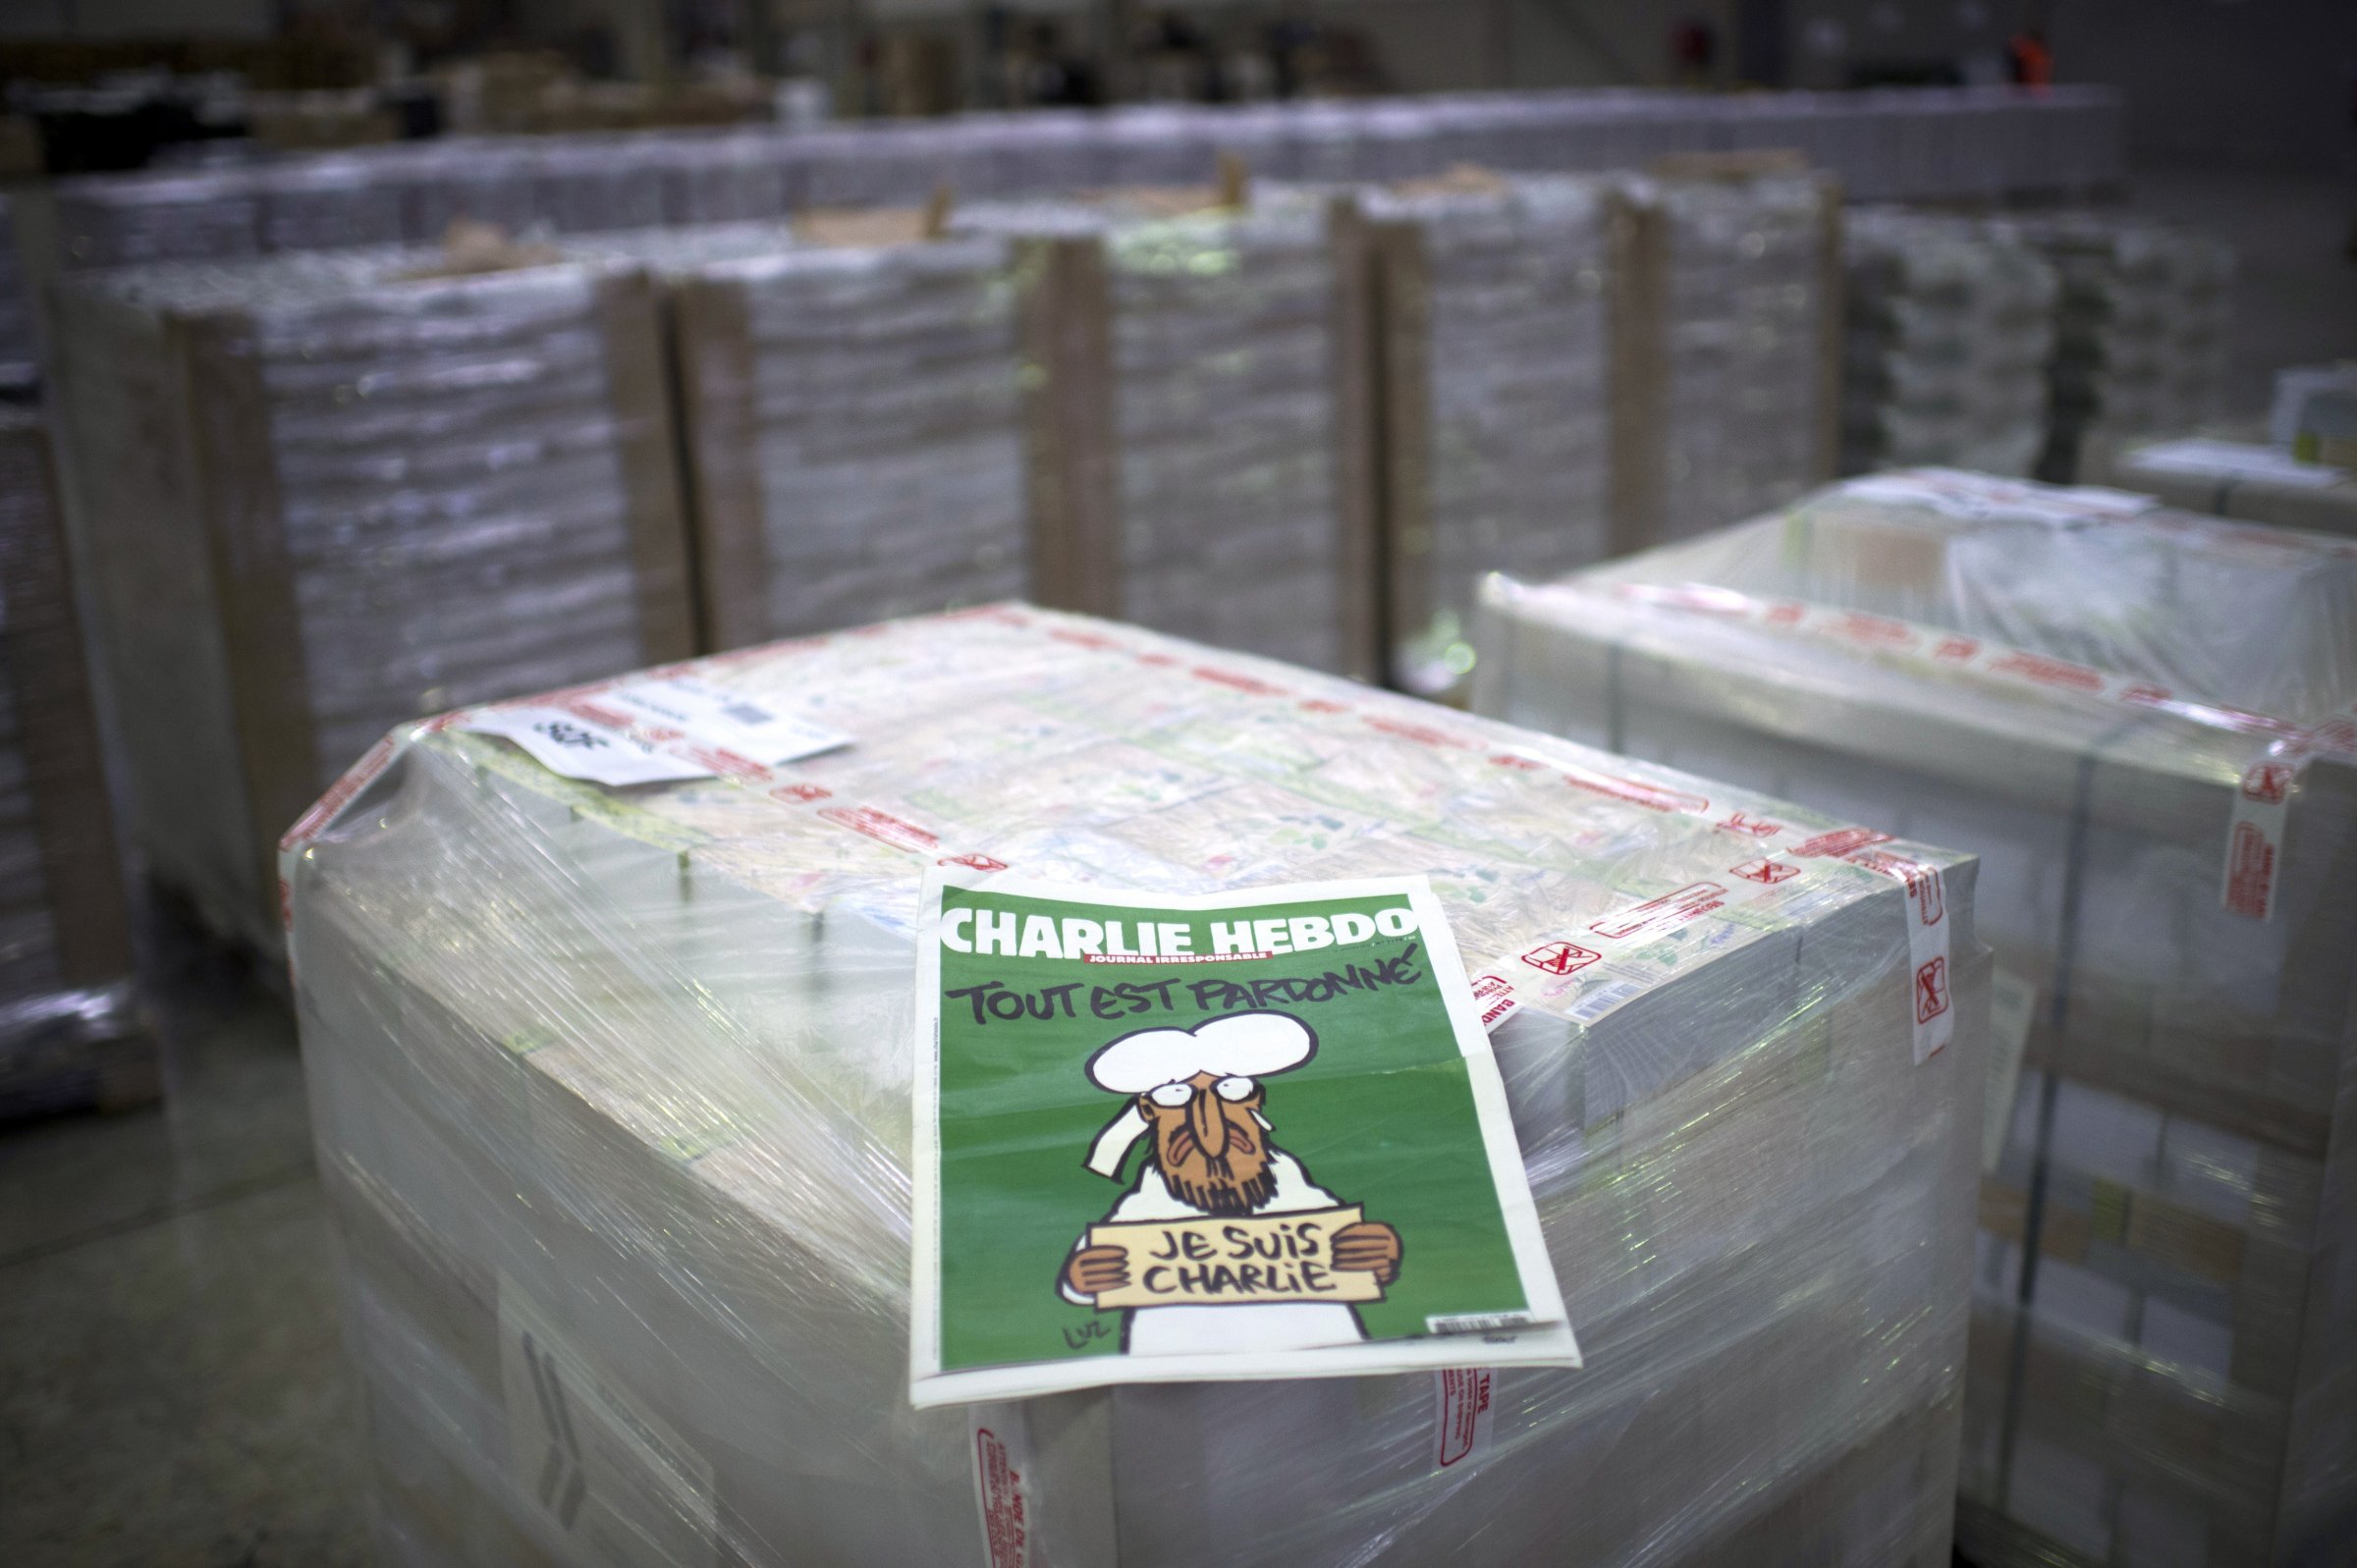 The weekly newspaper Charlie Hebdo, on January 13, 2015 in Villabe, south of Paris, a week after two jihadist gunmen stormed the Paris offices of the satirical magazine, killing 12 people including some of the country's best-known cartoonists. Its cover features the prophet with a tear in his eye, holding a "Je Suis Charlie" sign under the headline "All is forgiven".